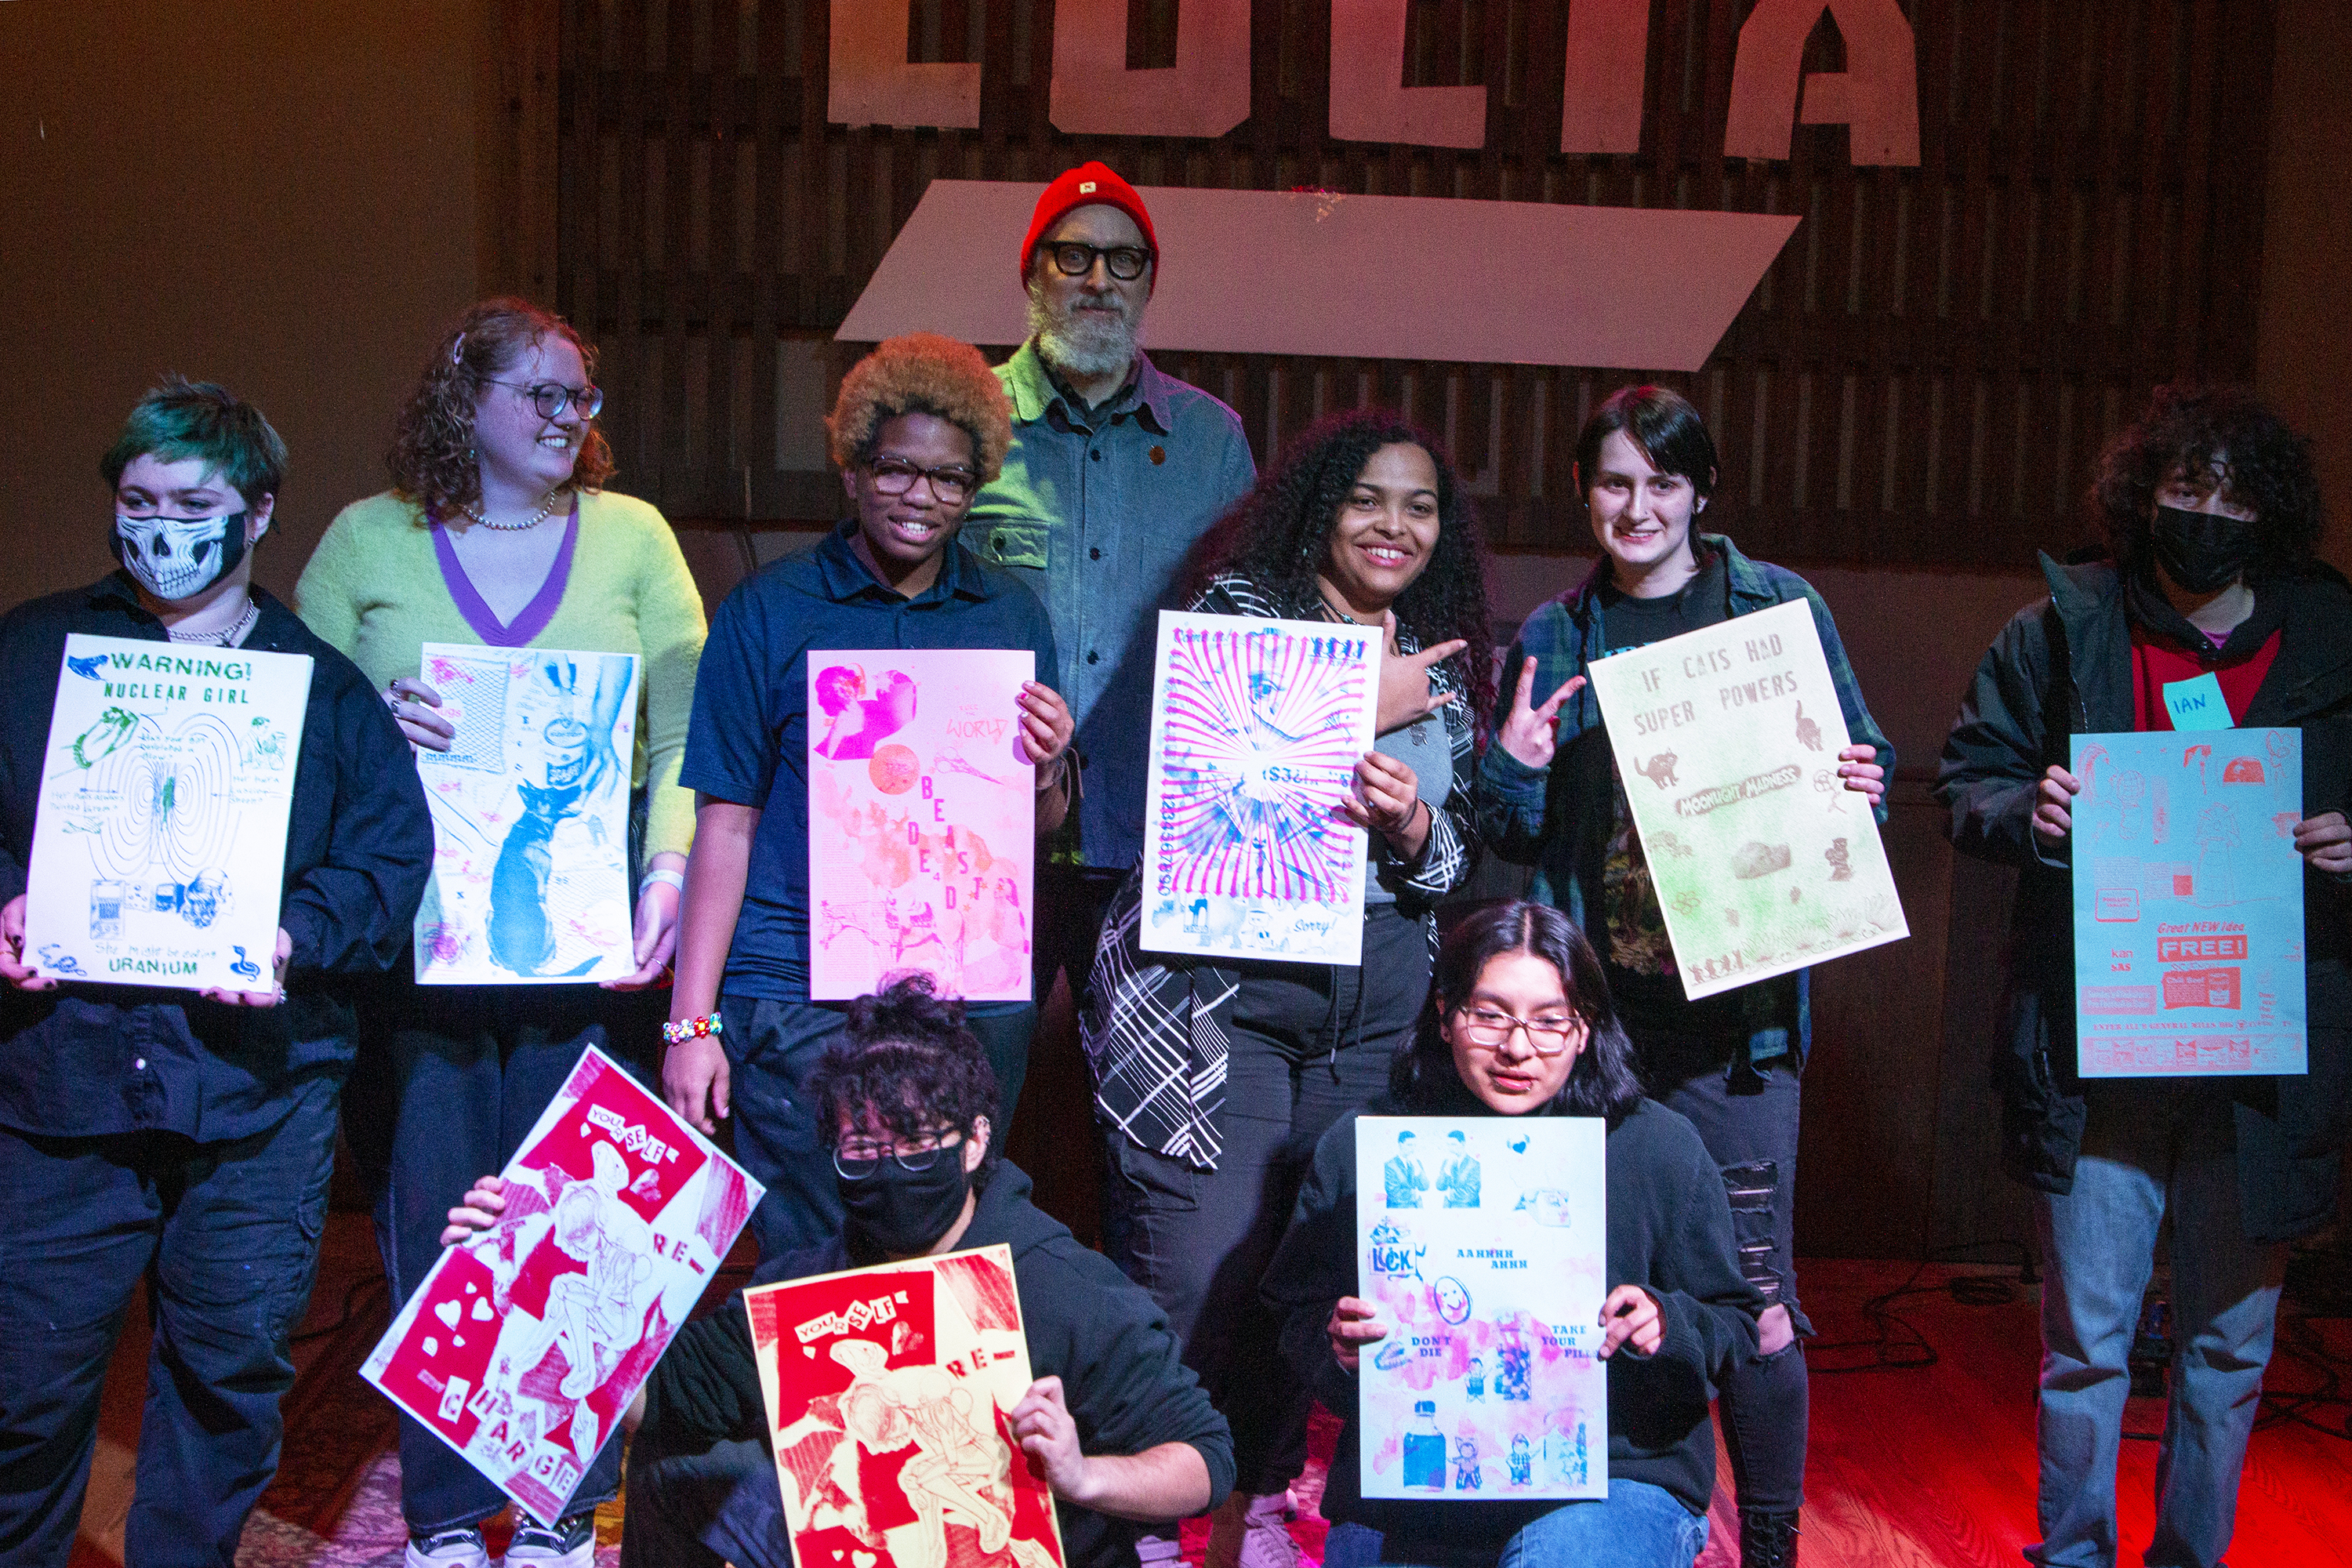 Ryan D. Clifford, Assistant Professor of Design and Visual Communication on stage with participants of the Radlab! workshop, all holding up their risographic art creations.